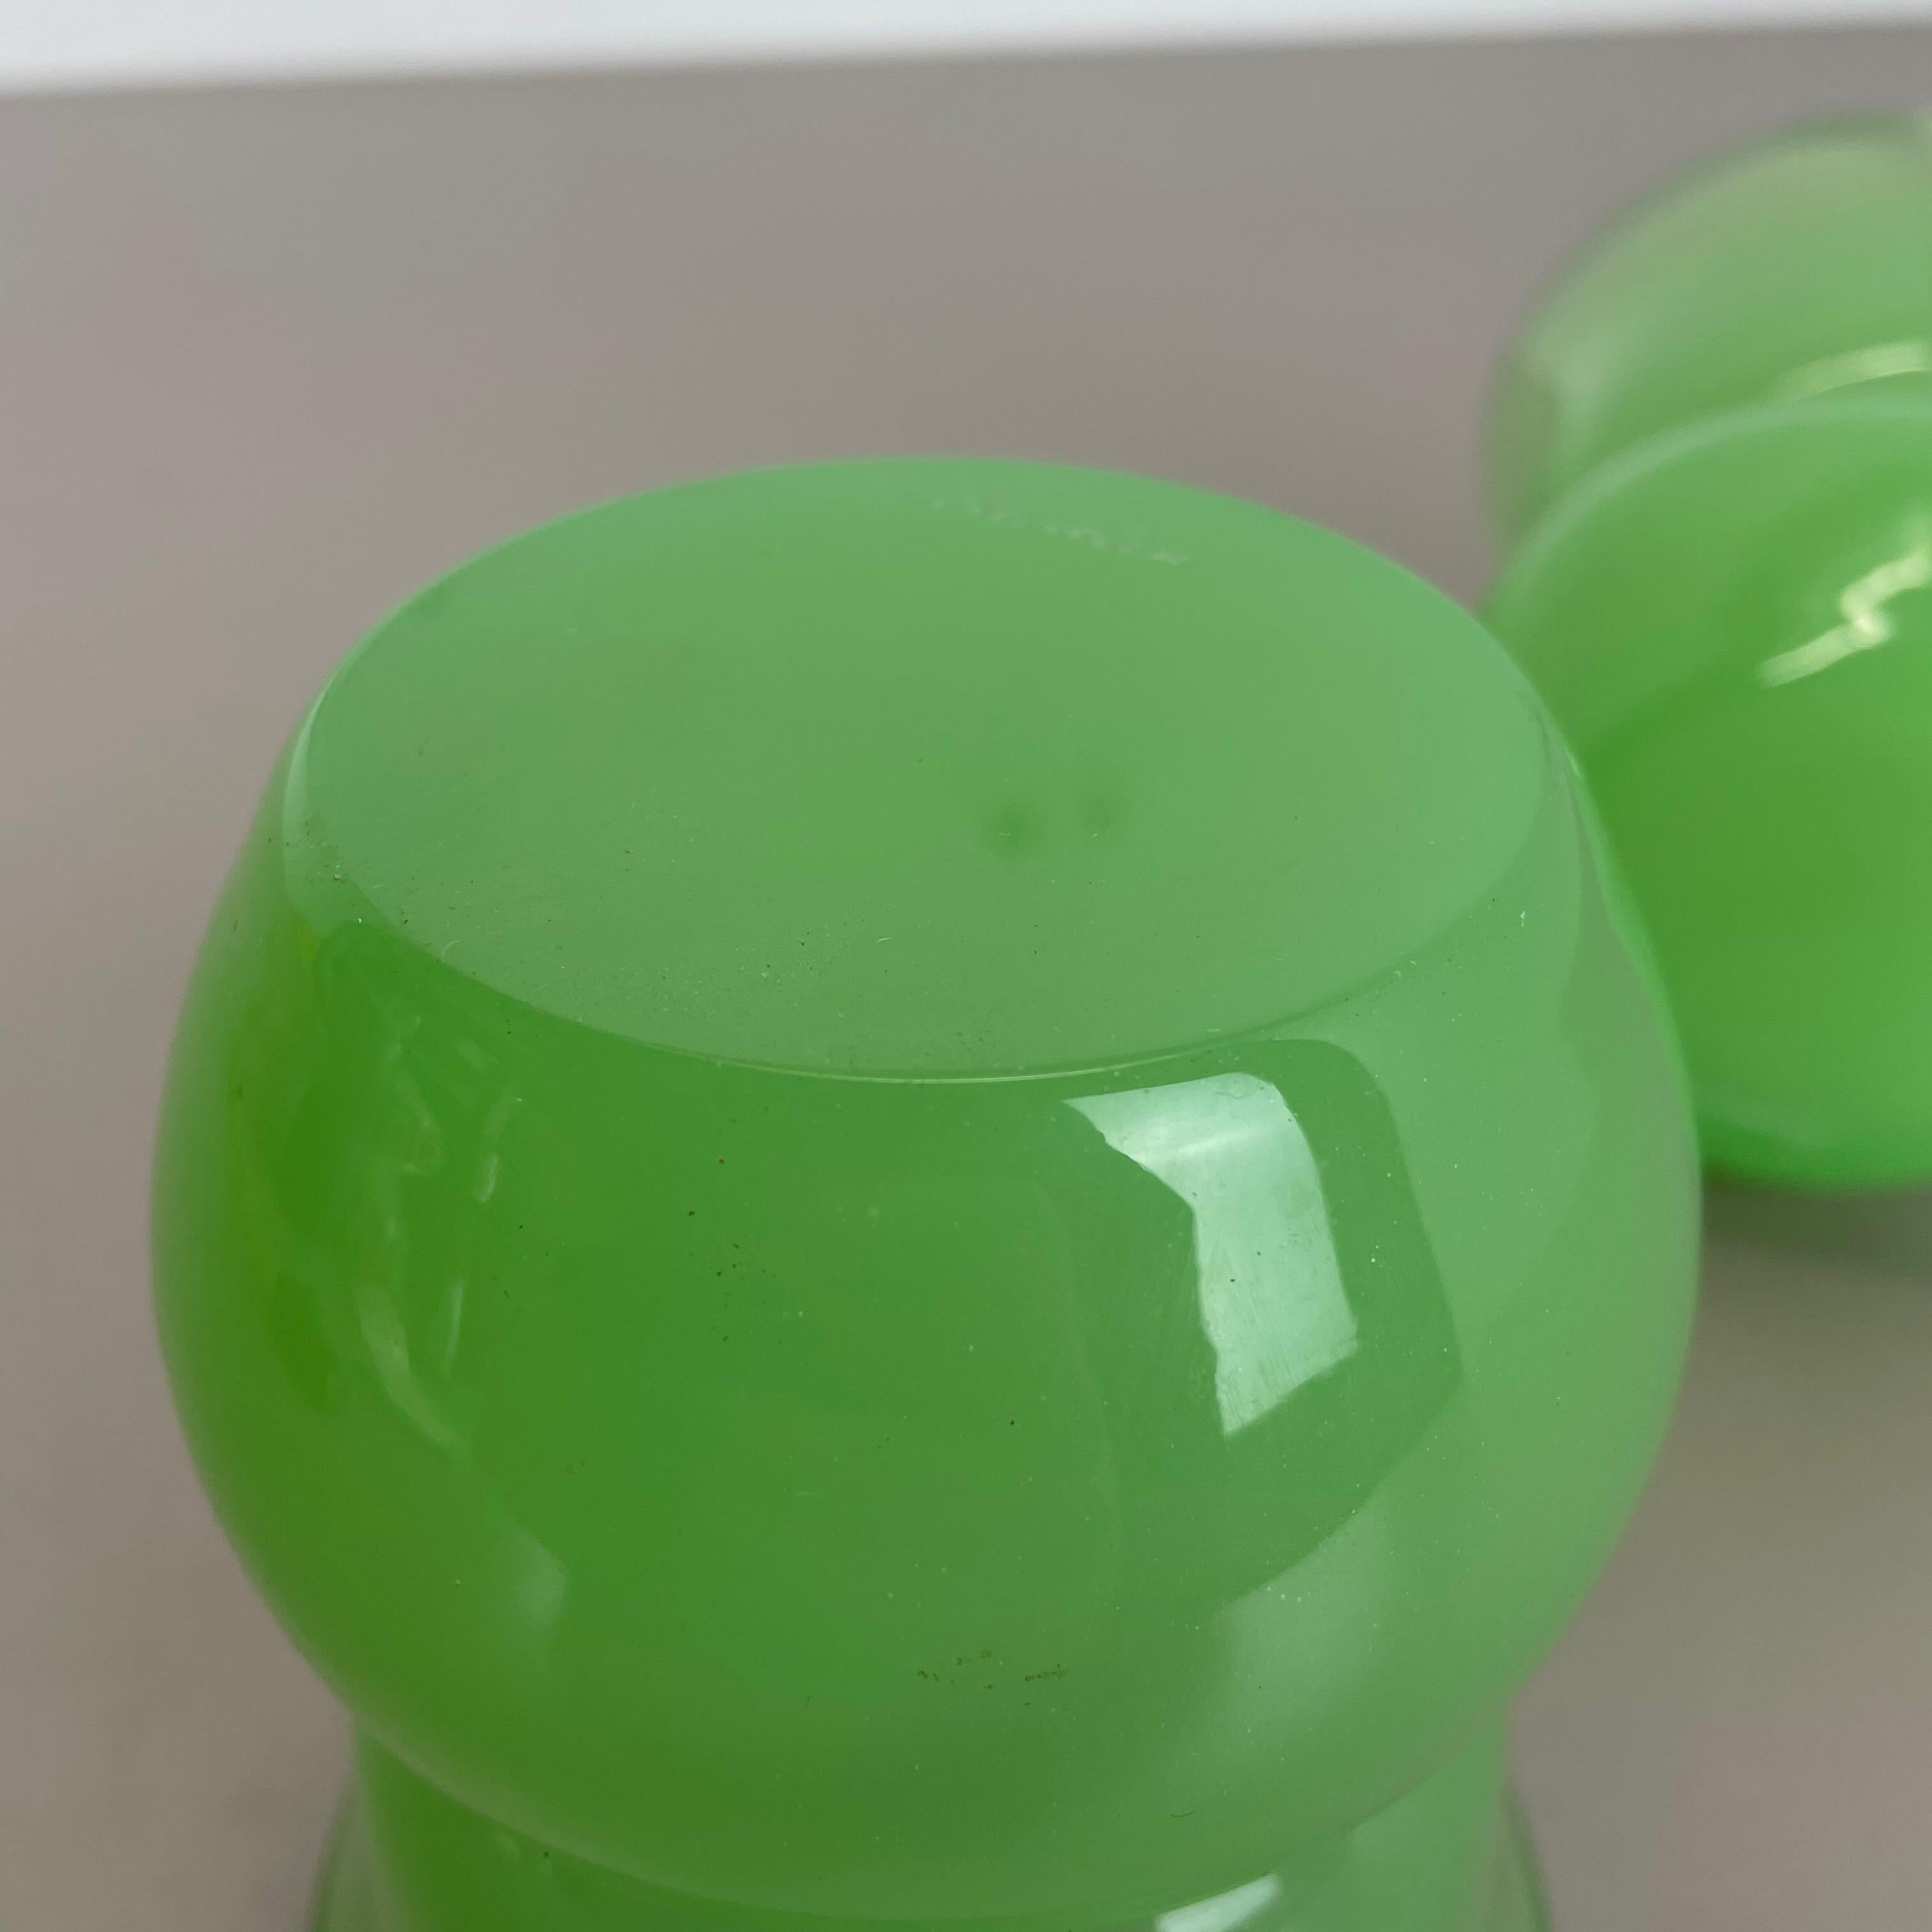 Set of 2 Green New Old Stock Murano Opaline Glass Vases by Gino Cenedese, 1960s For Sale 6